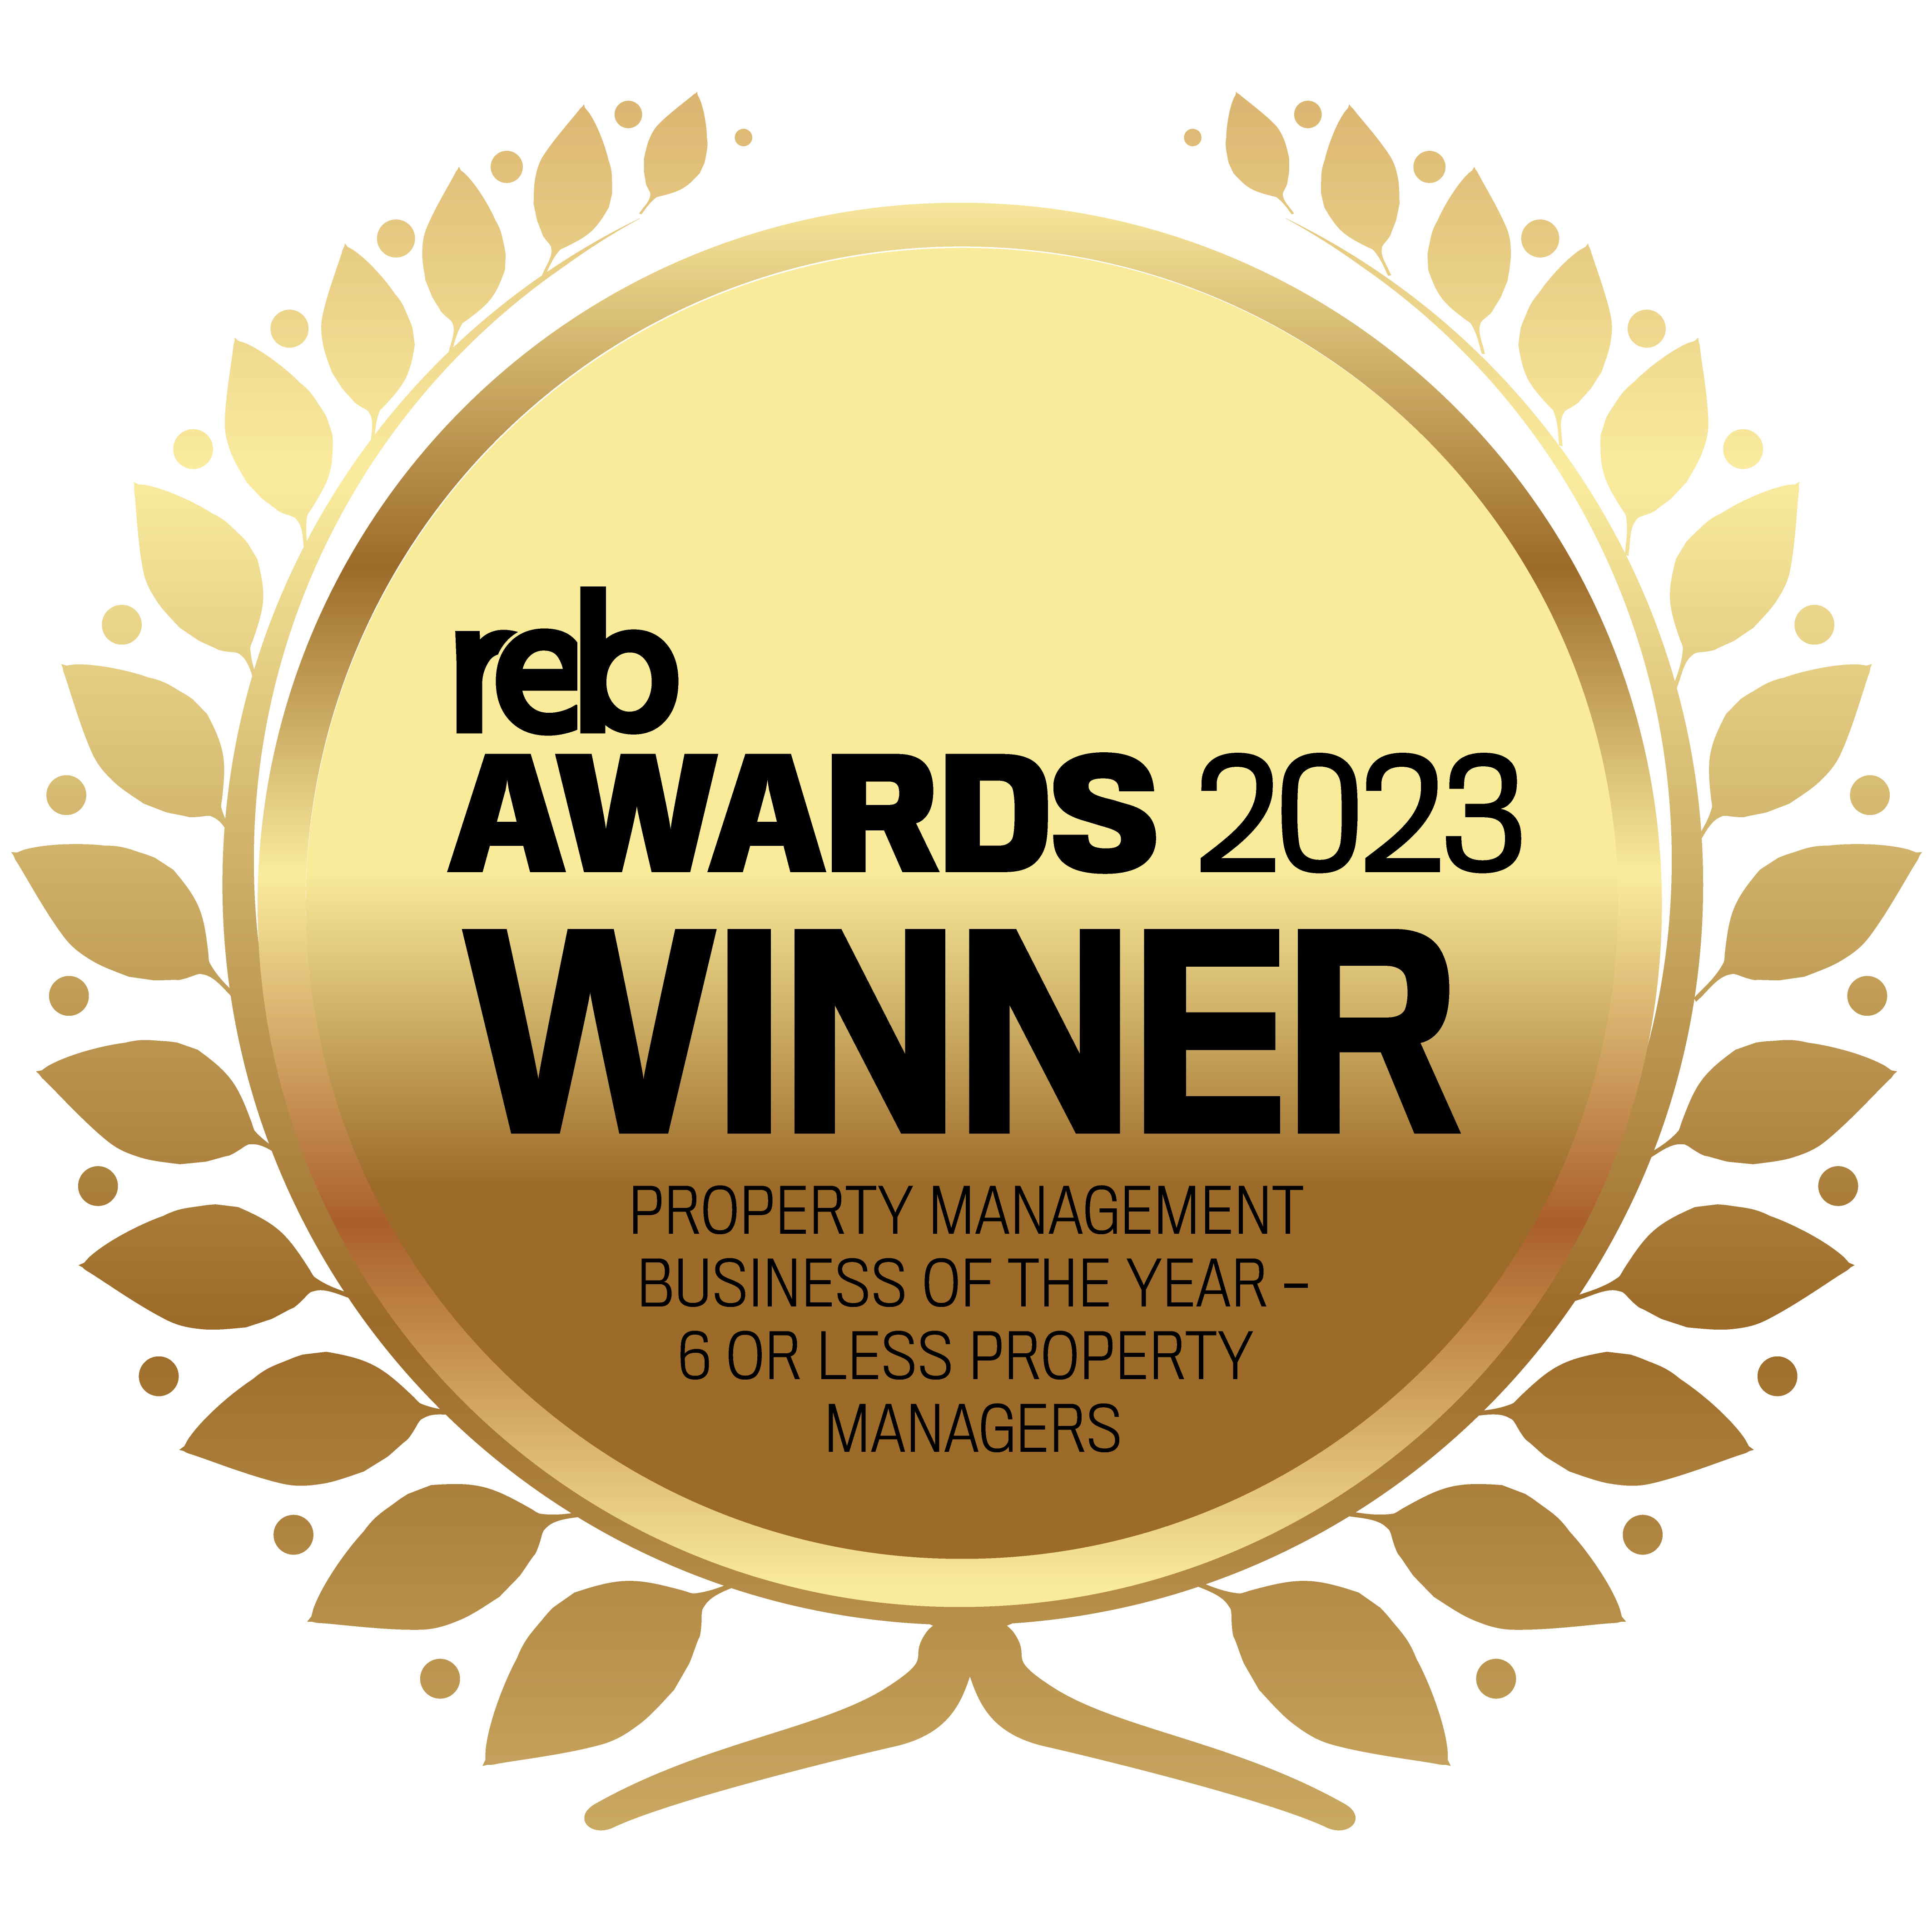 reb 2023 winners seals property management business of the year 6 or less property managers 1